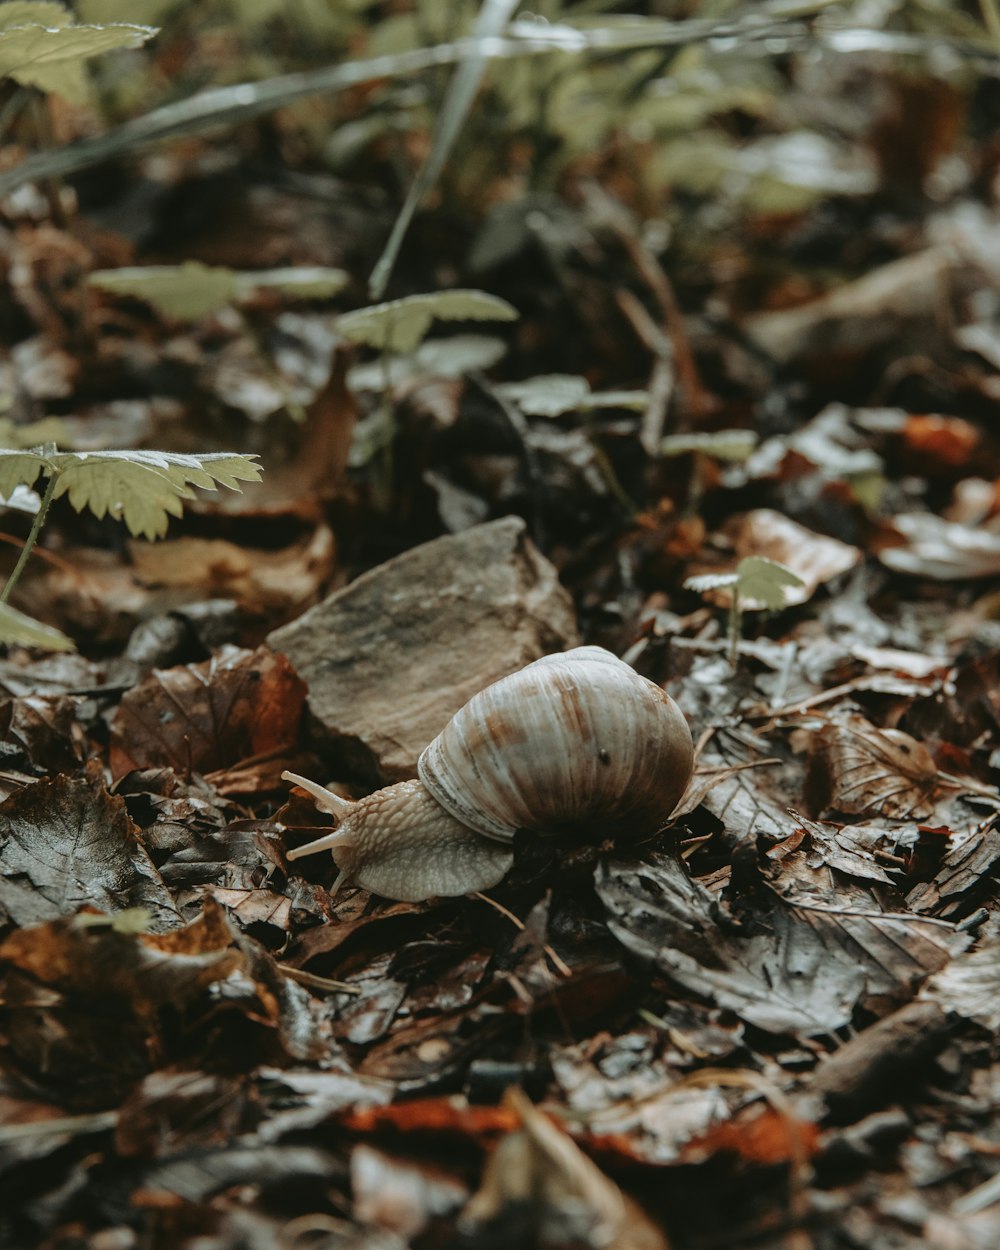 a snail is sitting on the ground among leaves